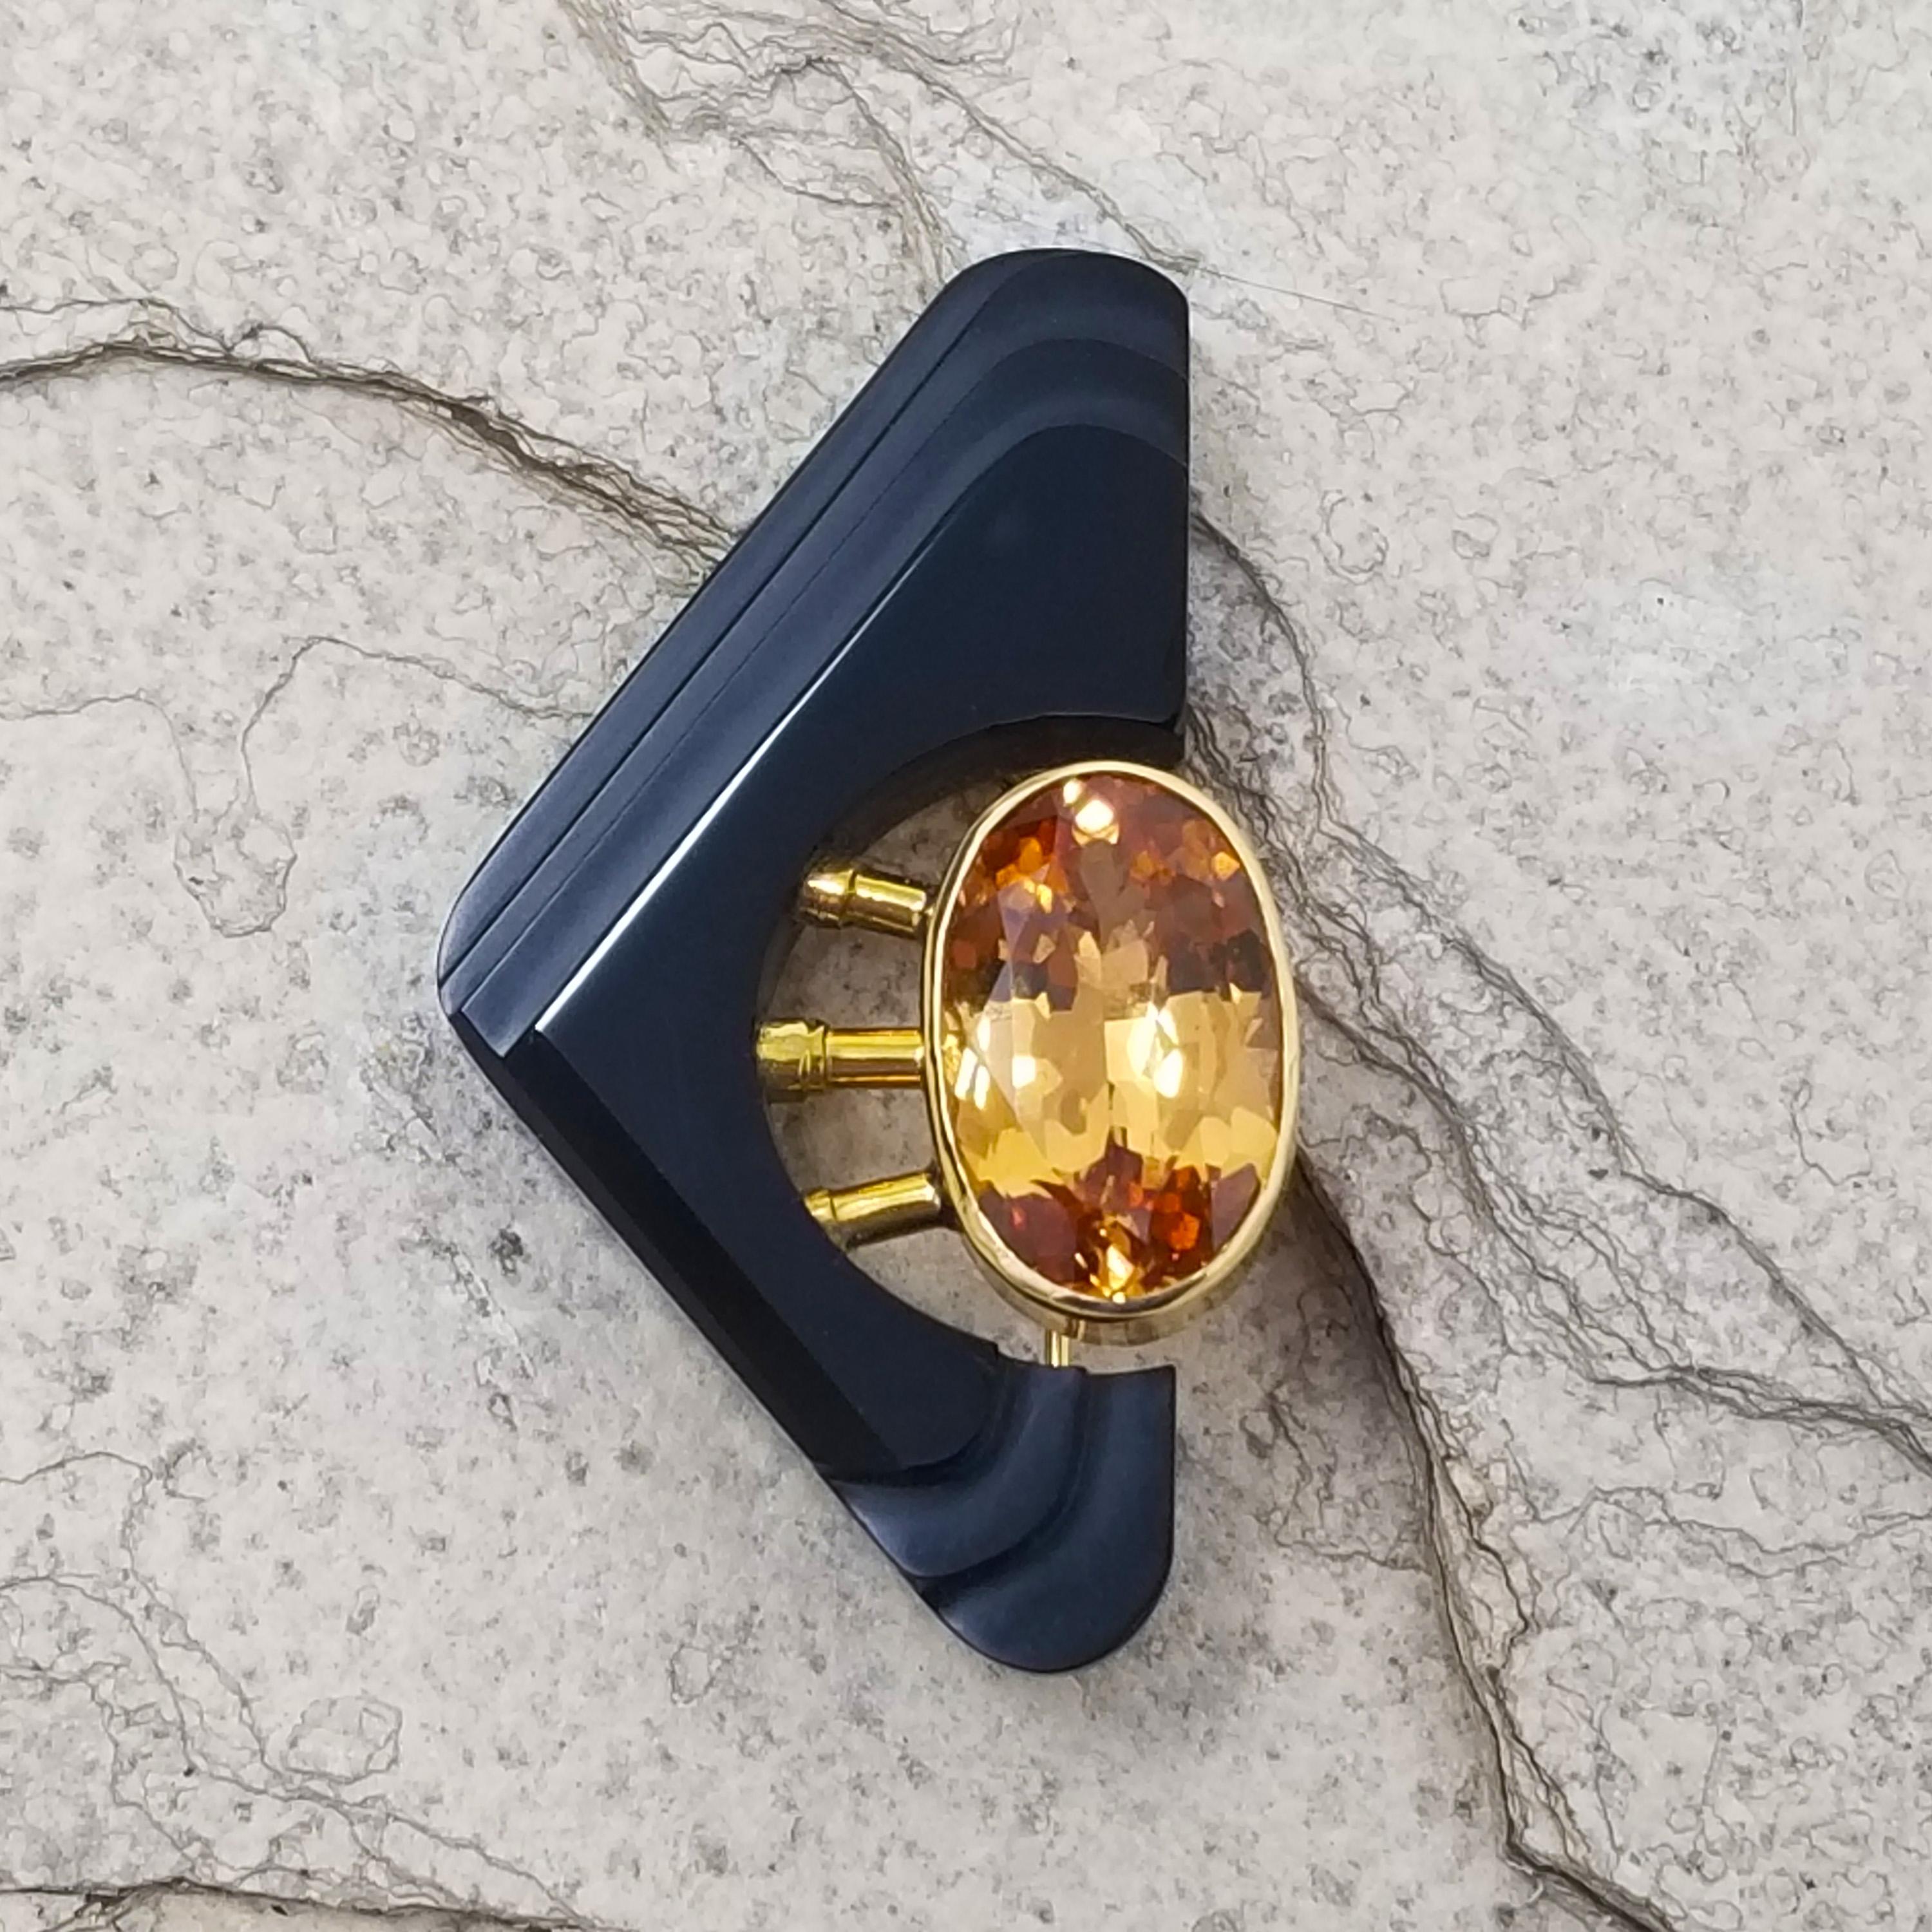 Contemporary 14.7ct Grossular Garnet and Carved Black Chalcedony 18 Karat Pendant and Brooch For Sale